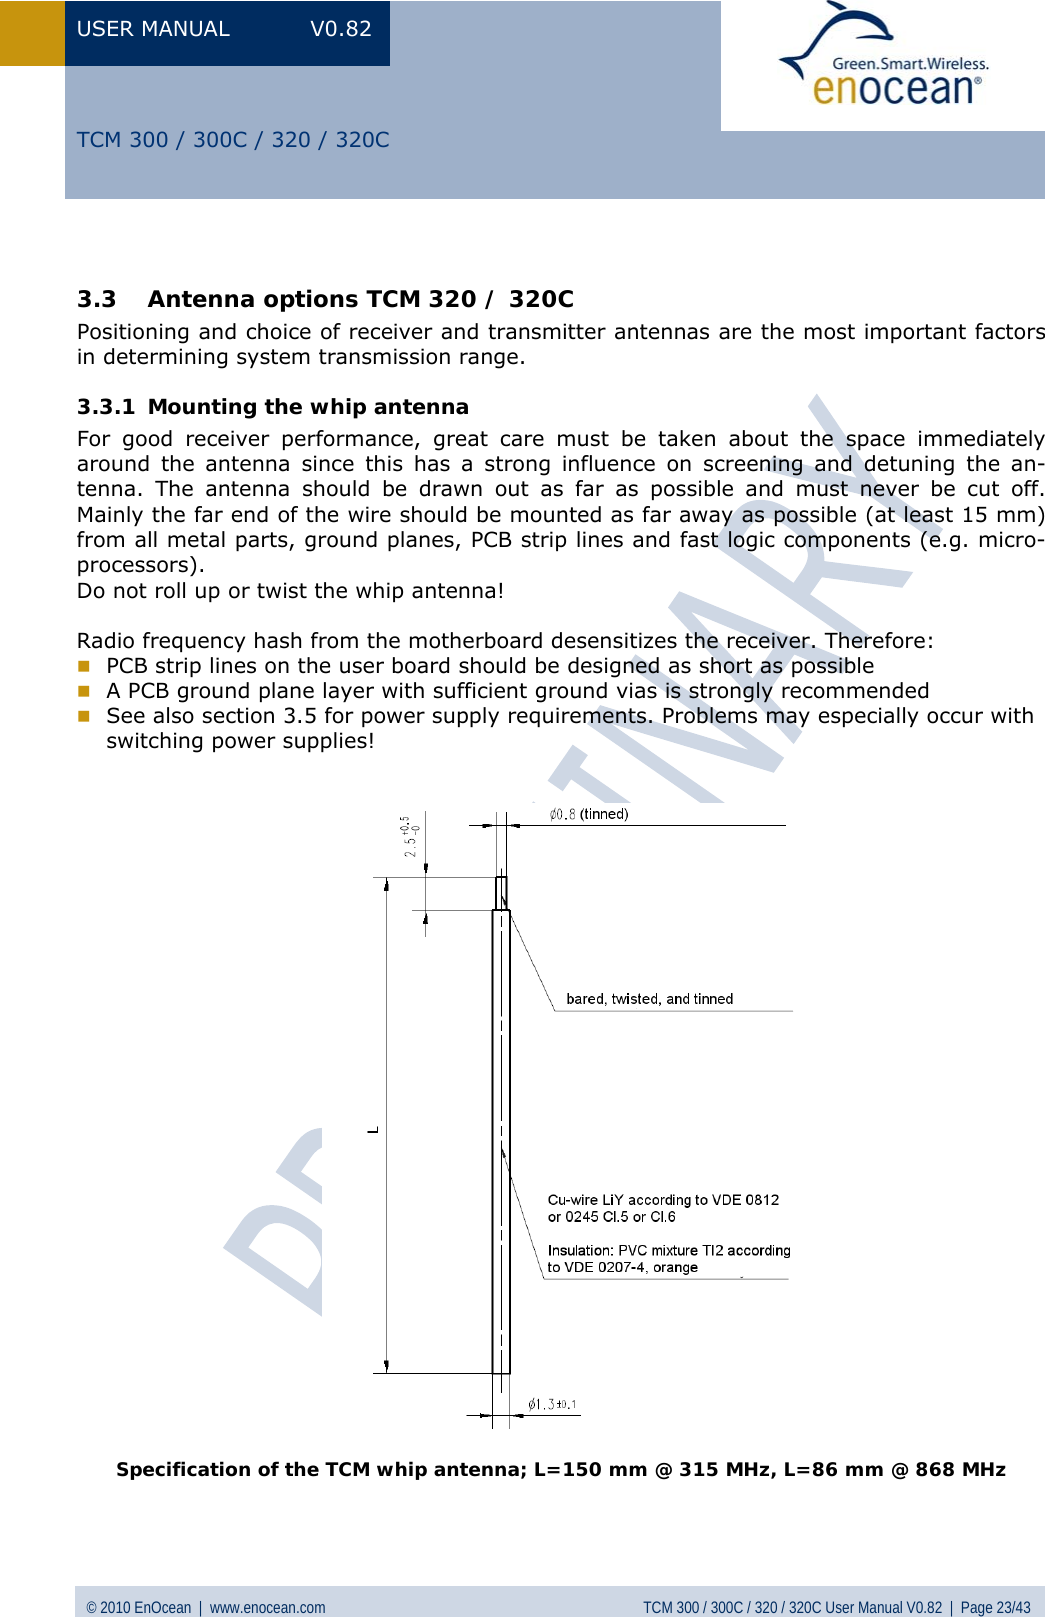 USER MANUAL V0.82 © 2010 EnOcean  |  www.enocean.com  TCM 300 / 300C / 320 / 320C User Manual V0.82  |  Page 23/43   TCM 300 / 300C / 320 / 320C  3.3 Antenna options TCM 320 / 320C Positioning and choice of receiver and transmitter antennas are the most important factors in determining system transmission range. 3.3.1 Mounting the whip antenna For good receiver performance, great care must be taken about the space immediately around the antenna since this has a strong influence on screening and detuning the an-tenna. The antenna should be drawn out as far as possible and must never be cut off. Mainly the far end of the wire should be mounted as far away as possible (at least 15 mm) from all metal parts, ground planes, PCB strip lines and fast logic components (e.g. micro-processors). Do not roll up or twist the whip antenna!  Radio frequency hash from the motherboard desensitizes the receiver. Therefore:  PCB strip lines on the user board should be designed as short as possible  A PCB ground plane layer with sufficient ground vias is strongly recommended   See also section  3.5 for power supply requirements. Problems may especially occur with switching power supplies!     Specification of the TCM whip antenna; L=150 mm @ 315 MHz, L=86 mm @ 868 MHz  